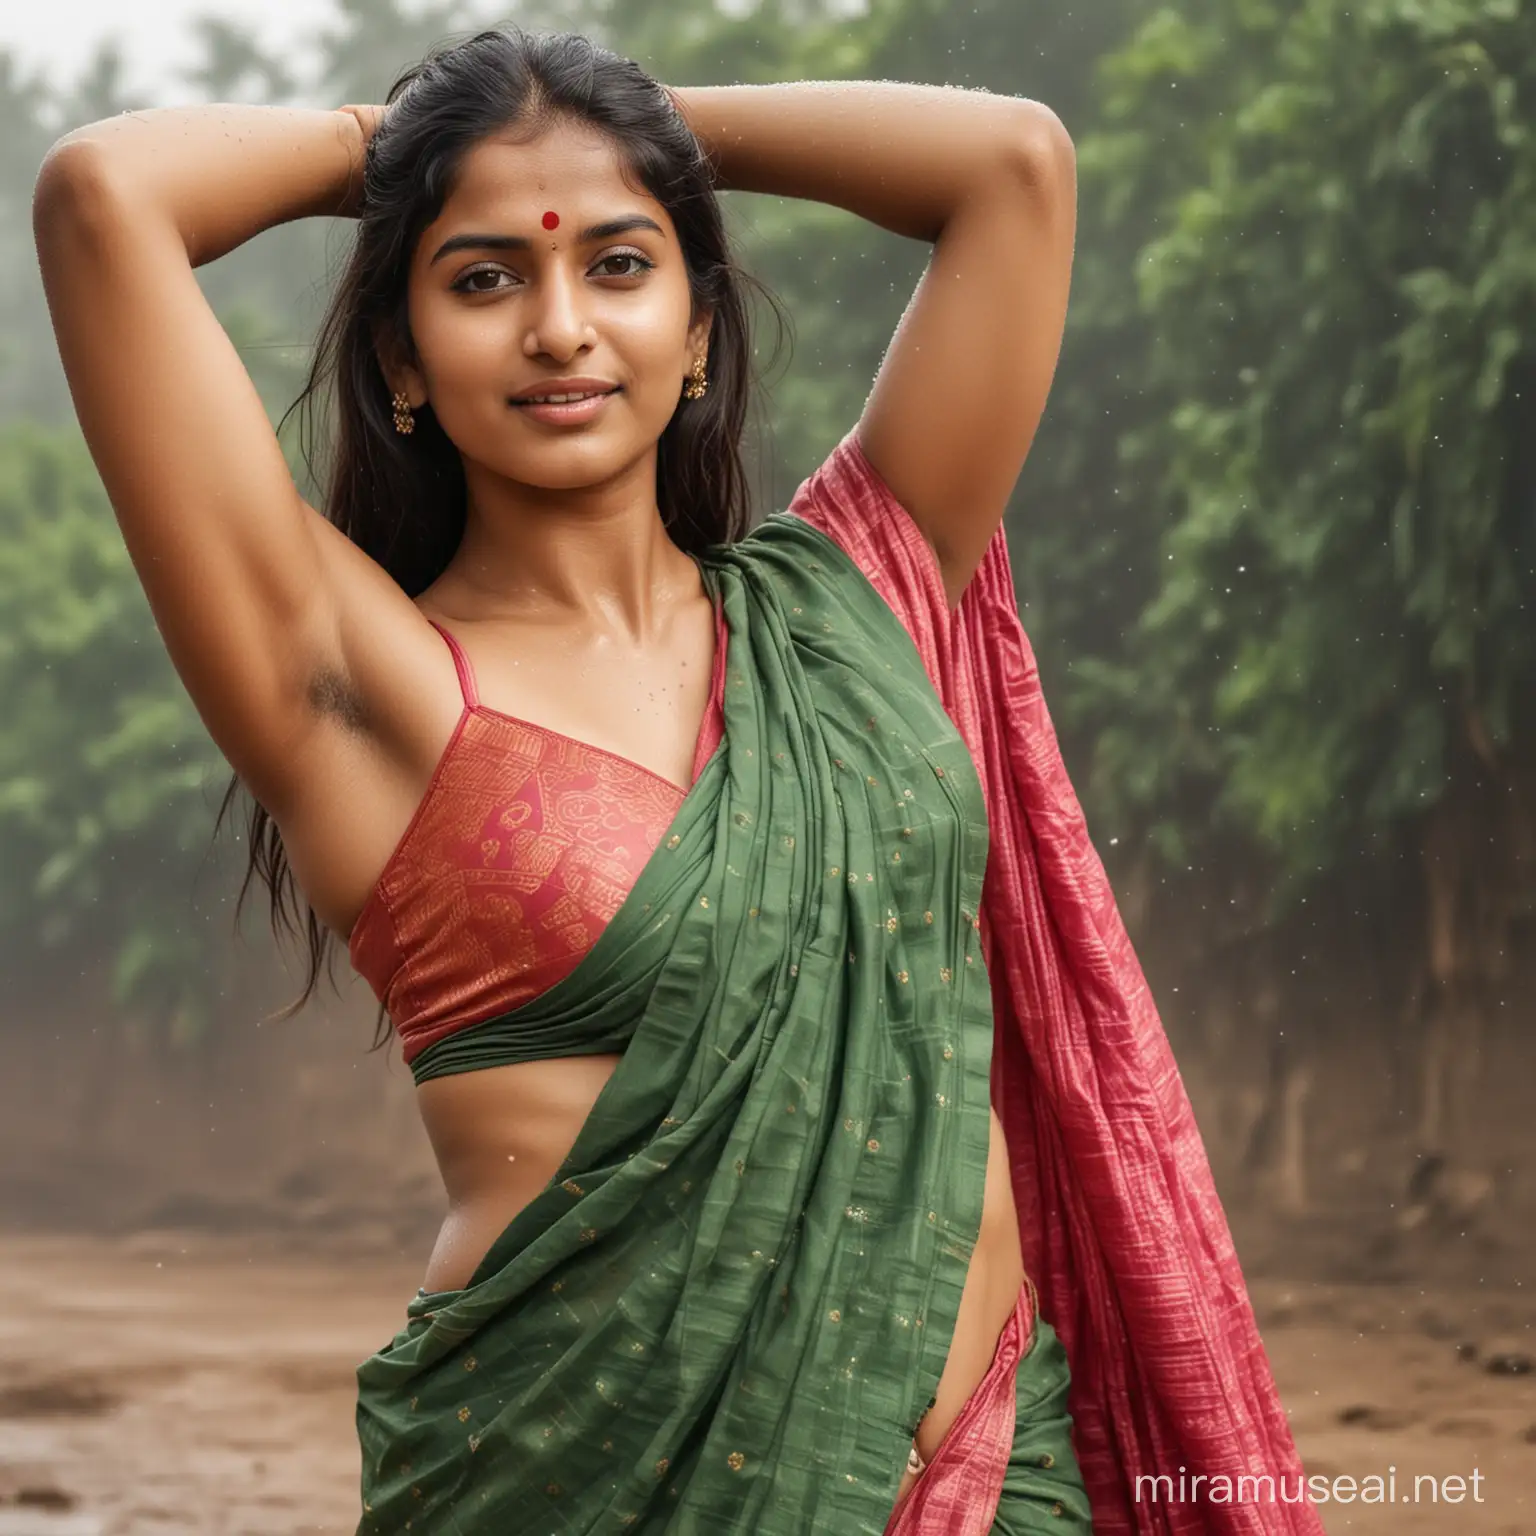 Indian Women in Saree with Arms Up Showing Navel and Sweat